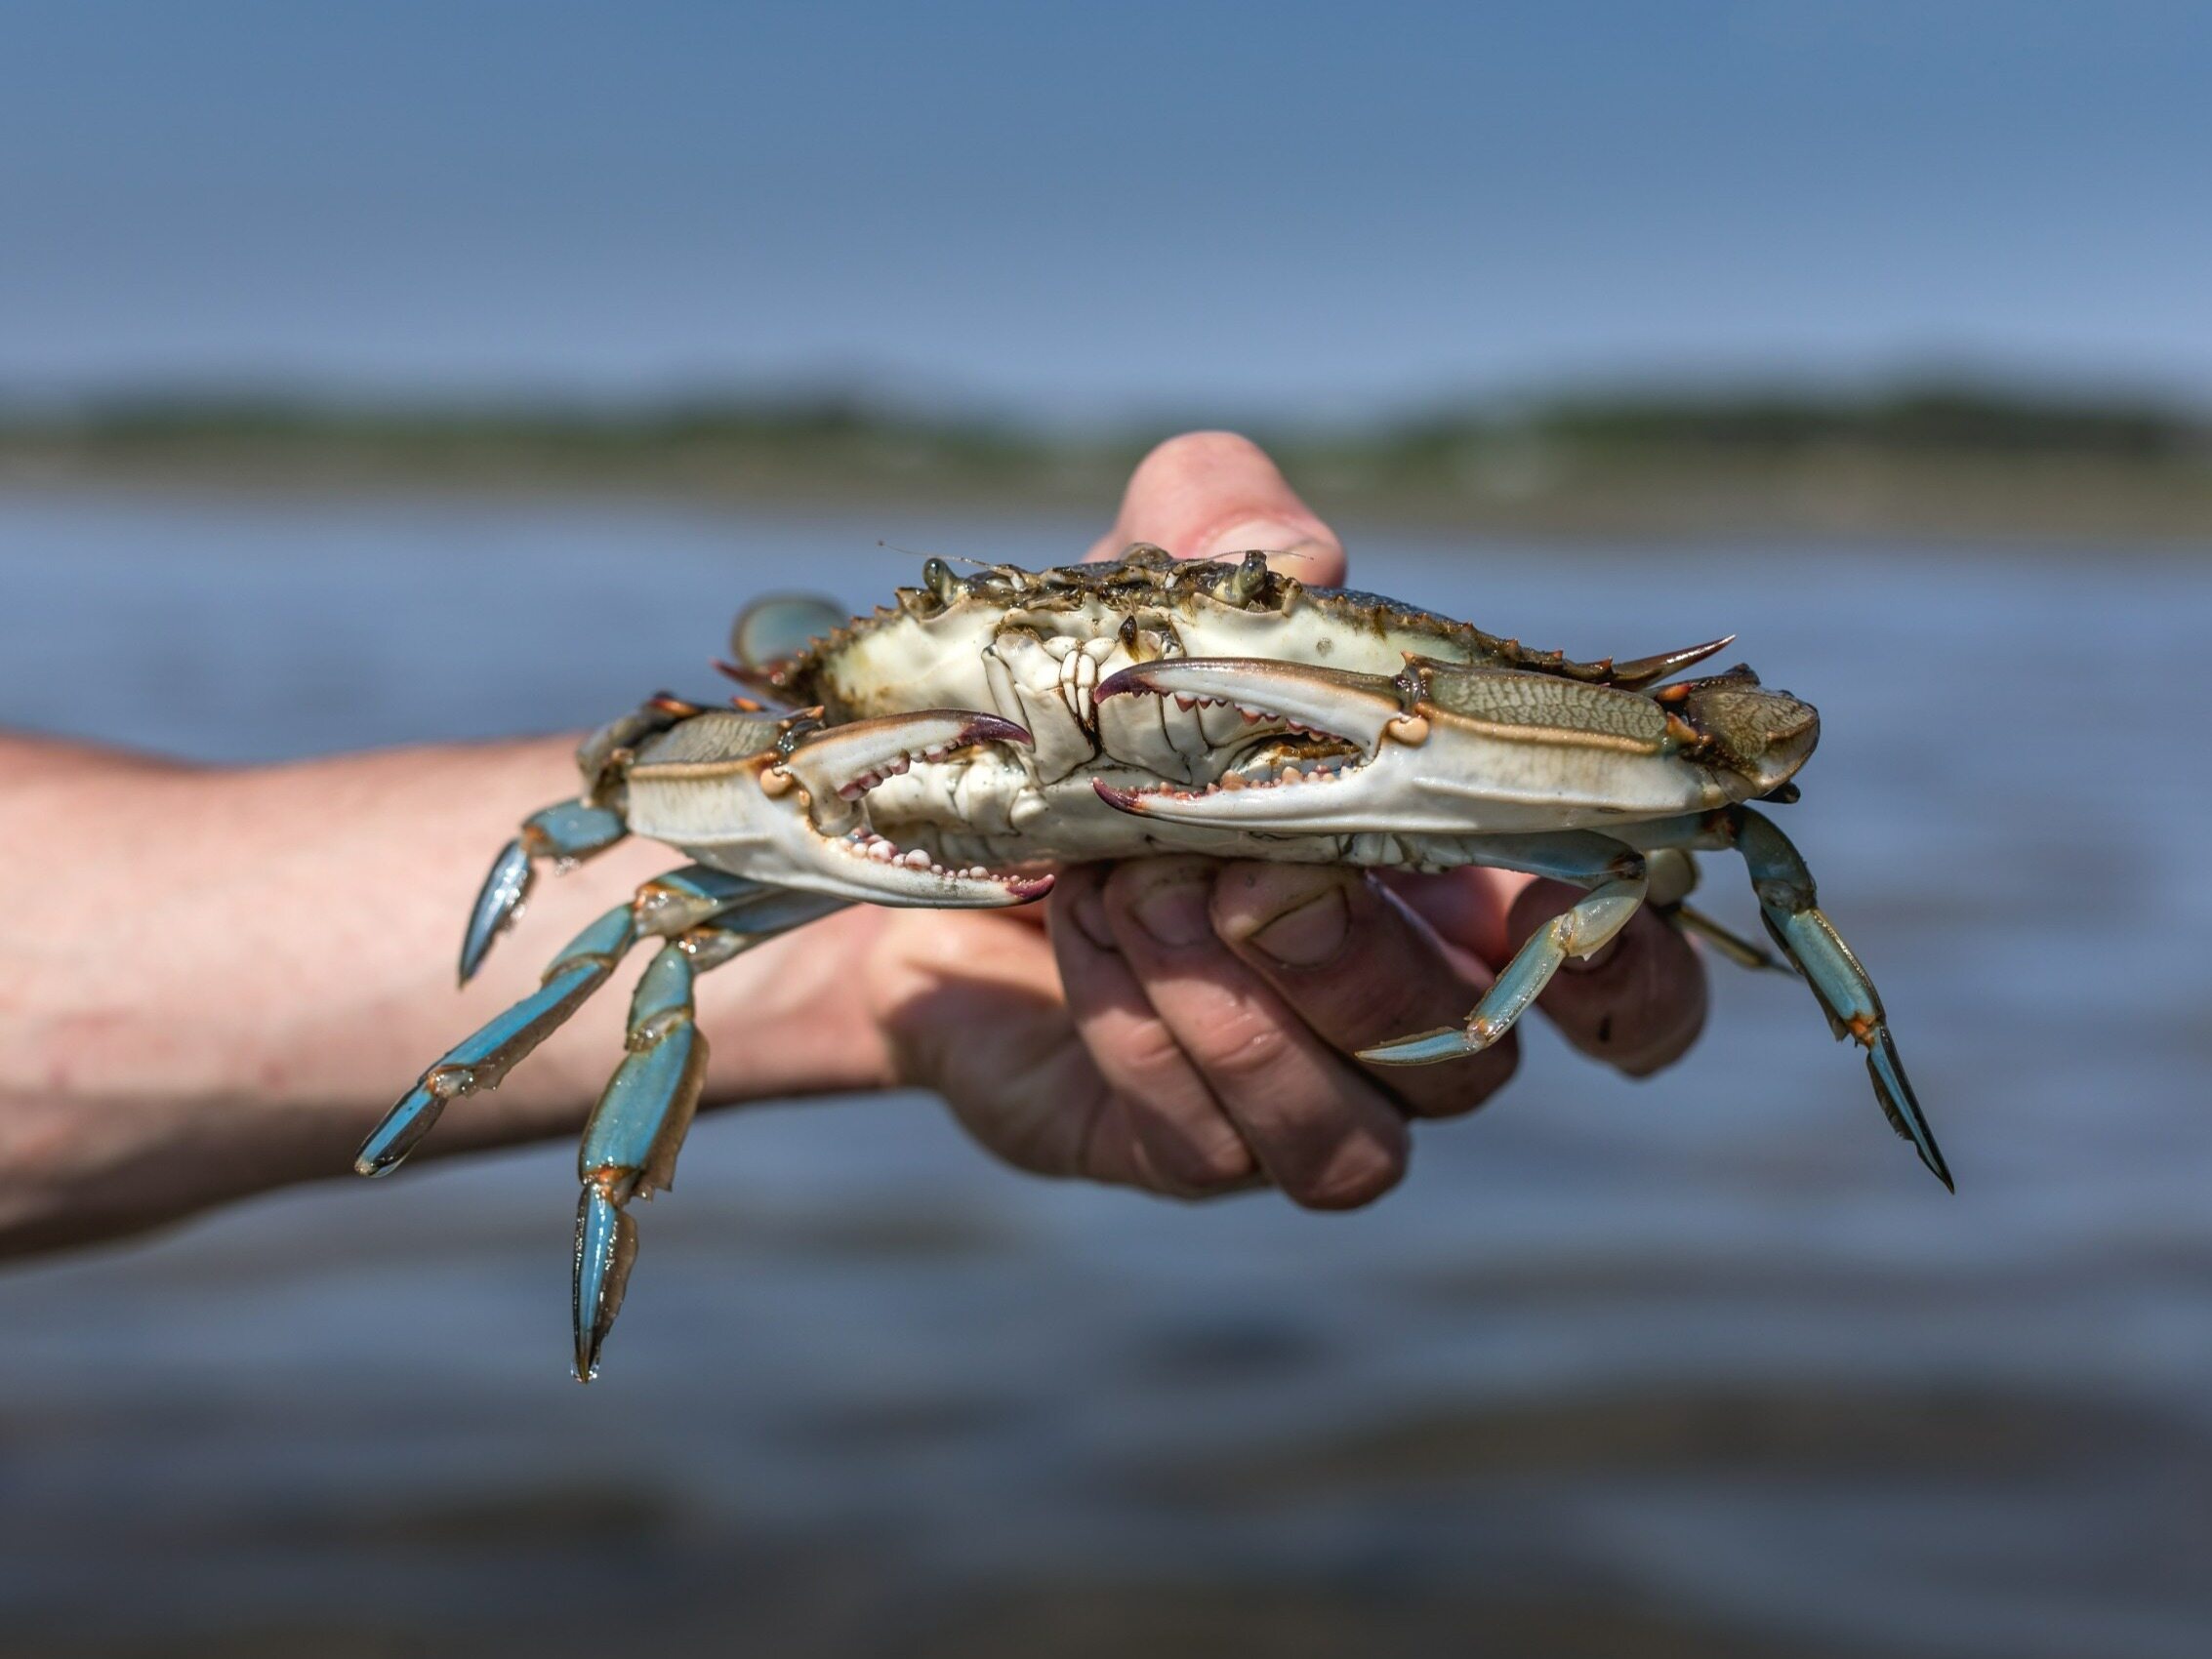 Blue crabs are devastating, so they'll be on the restaurant menu.  Such a delicacy they want in Italy